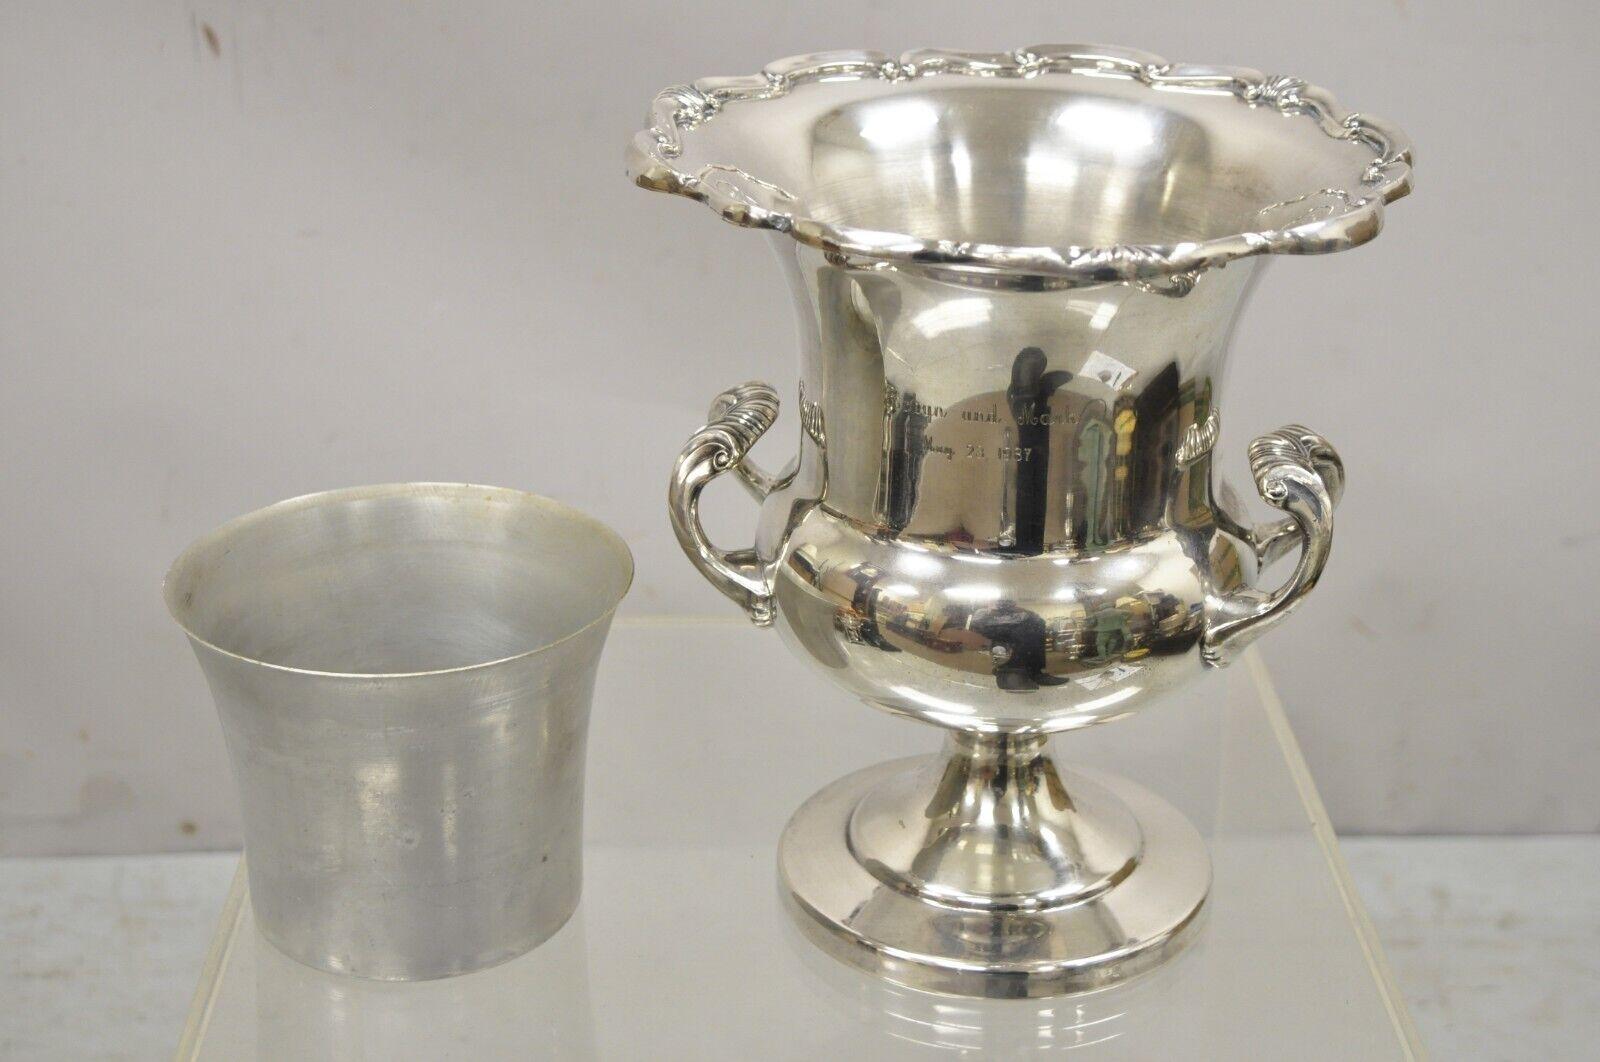 Engraved FB Rogers Regency style silver plated twin handle wine chiller ice bucket. Item featured is engraved 